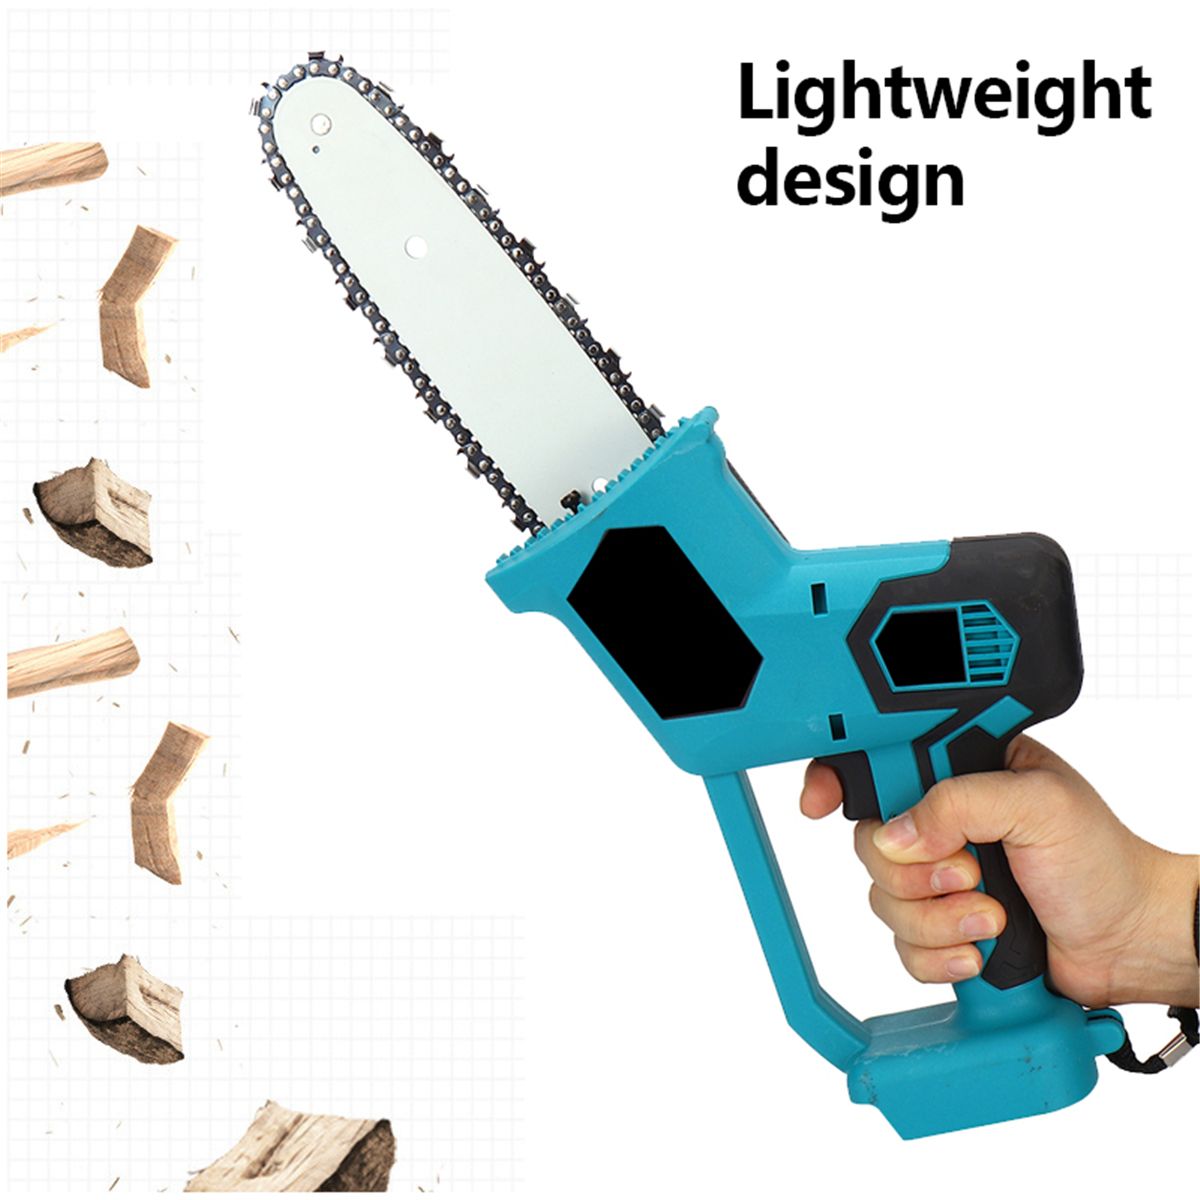 1280W-Electric-Cordless-Chainsaw-Chain-Saw-Garden-Cutting-Tools-For-21V-Makita-Battery-1759379